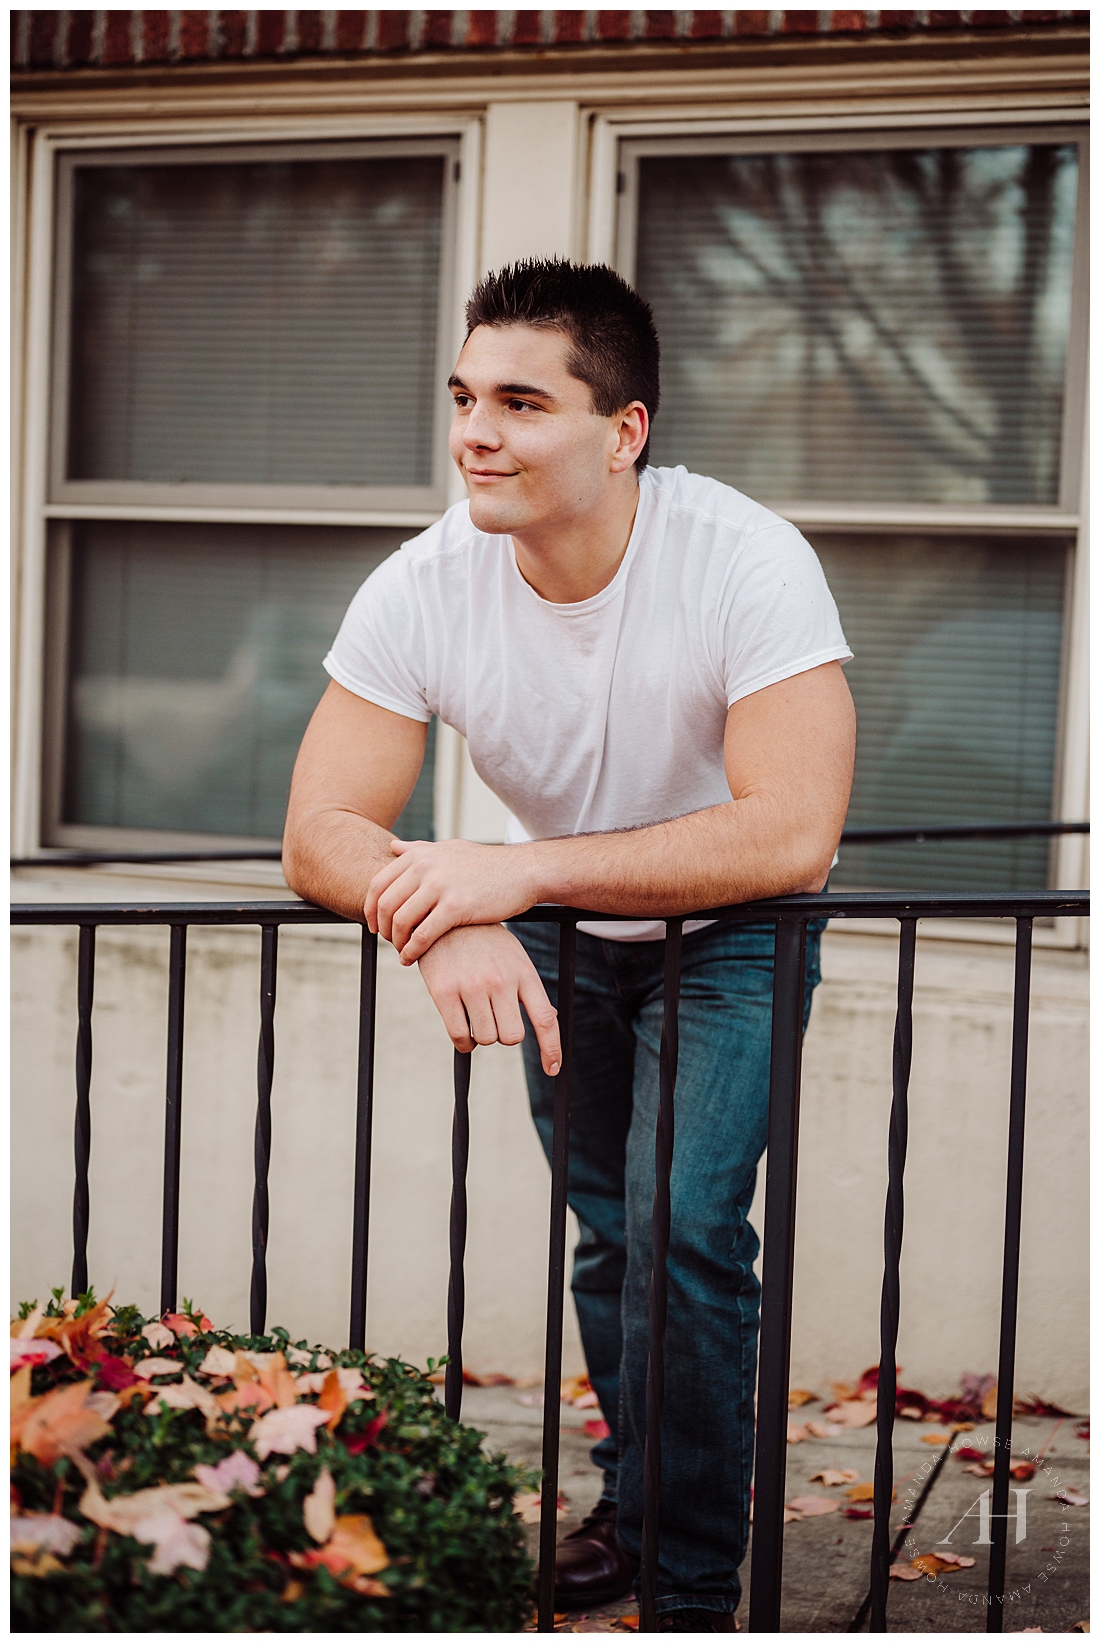 Senior Portrait Ideas For Guys | PNW Senior Photography | Photographed by the Best Tacoma, Washington Senior Photographer Amanda Howse Photography